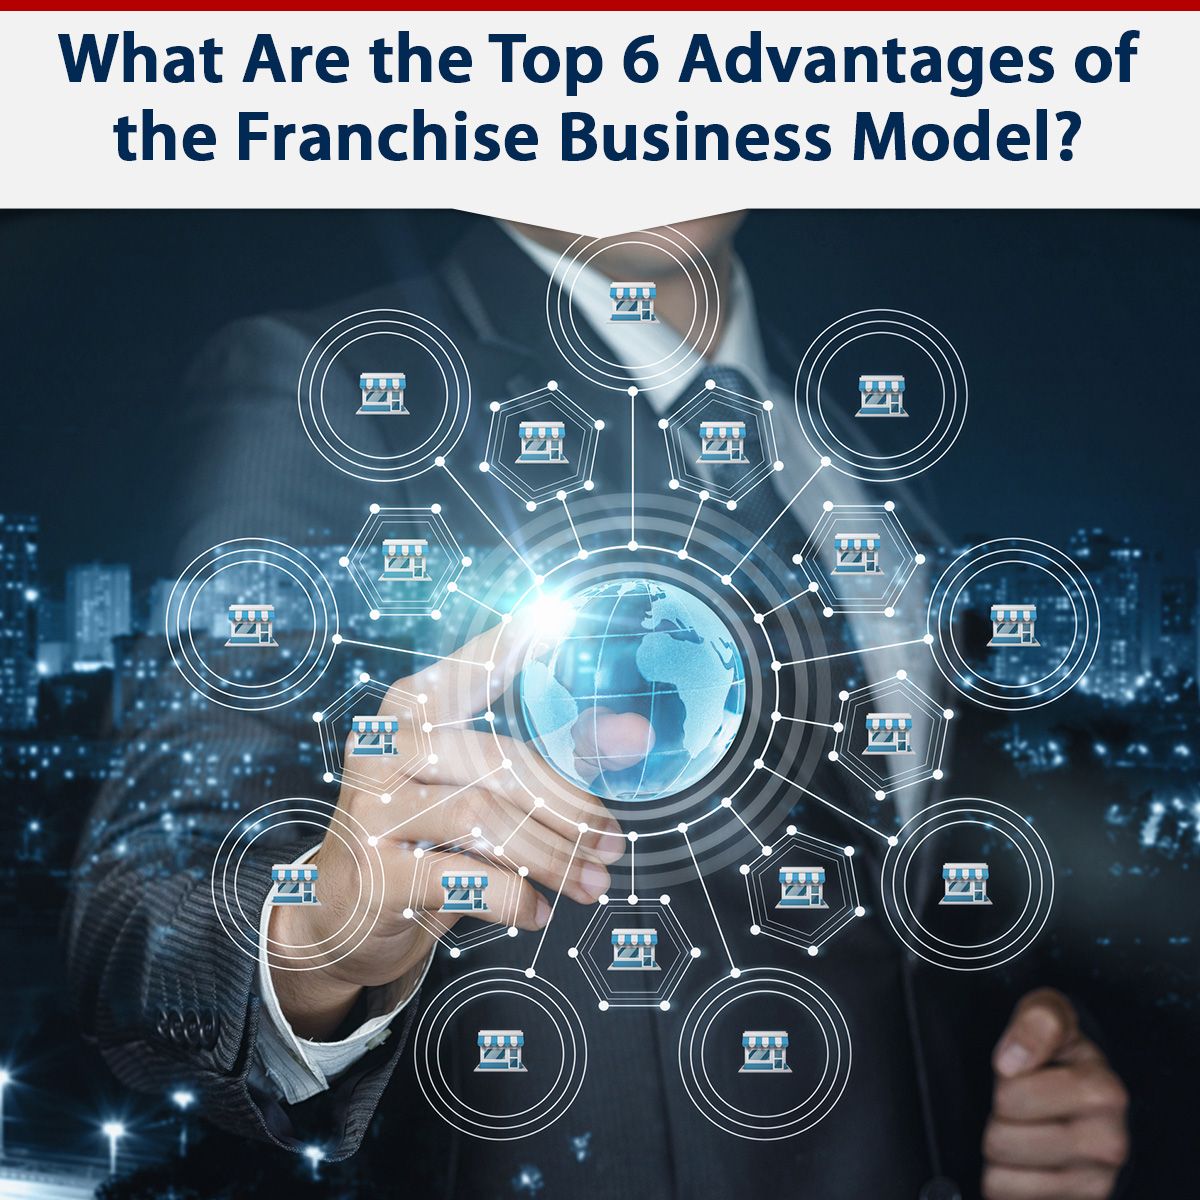 What Are the Top 6 Advantages of the Franchise Business Model?